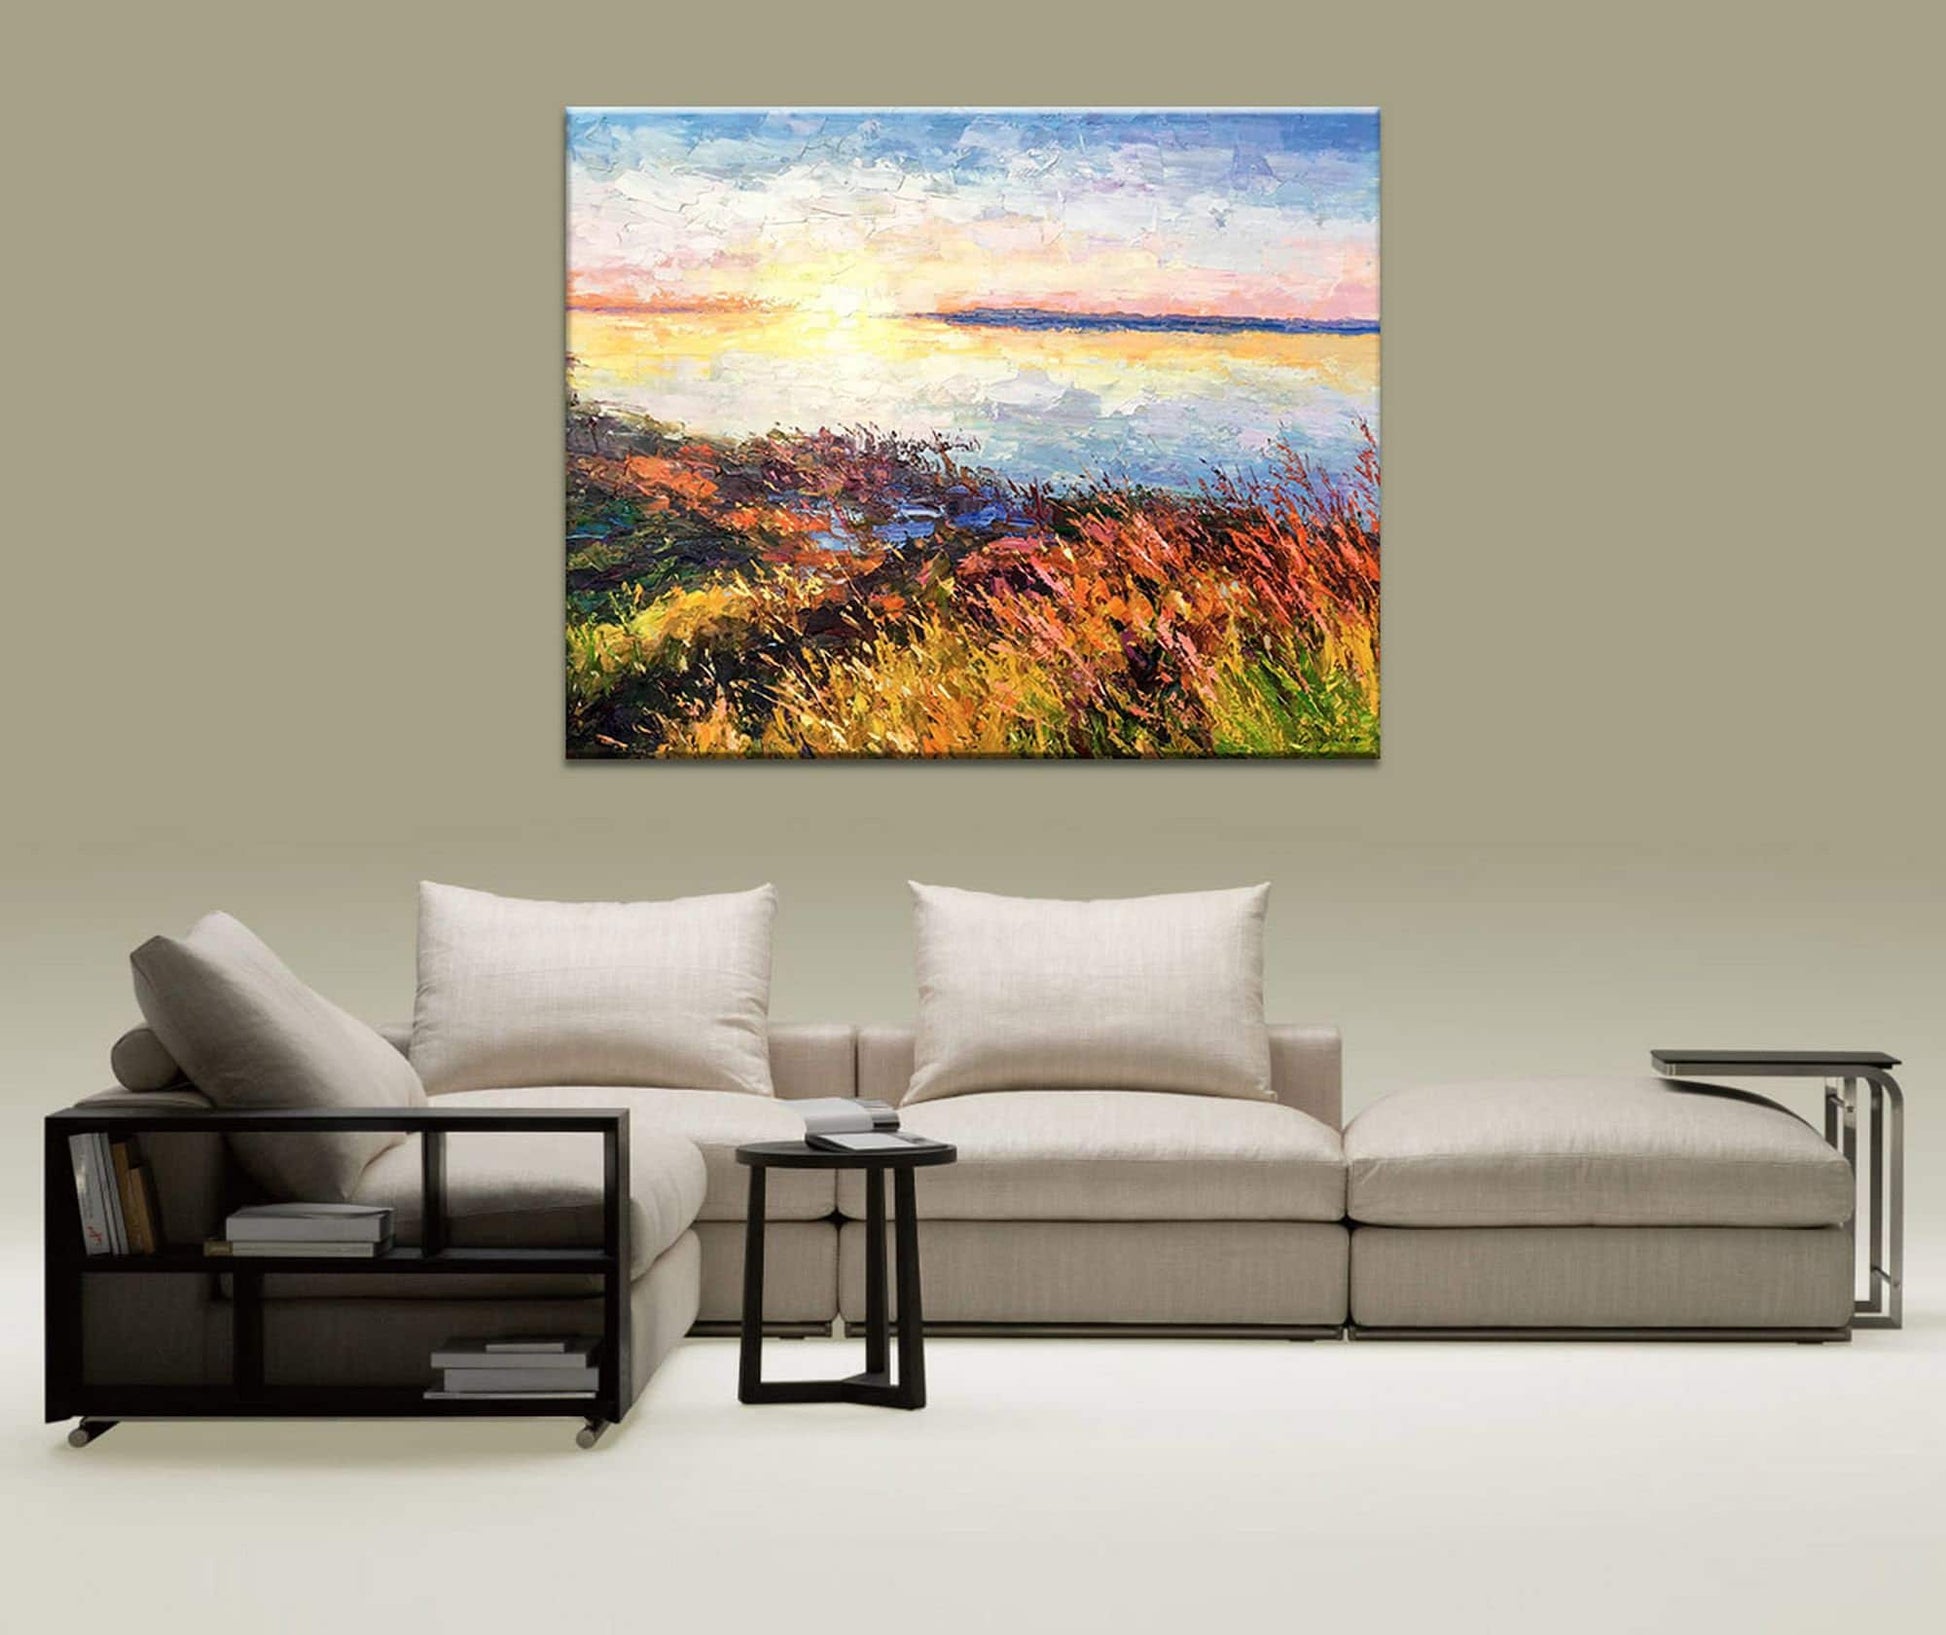 Experience the beauty of a Sunrise by the Lake- Large oil palette knife painting for your home decor